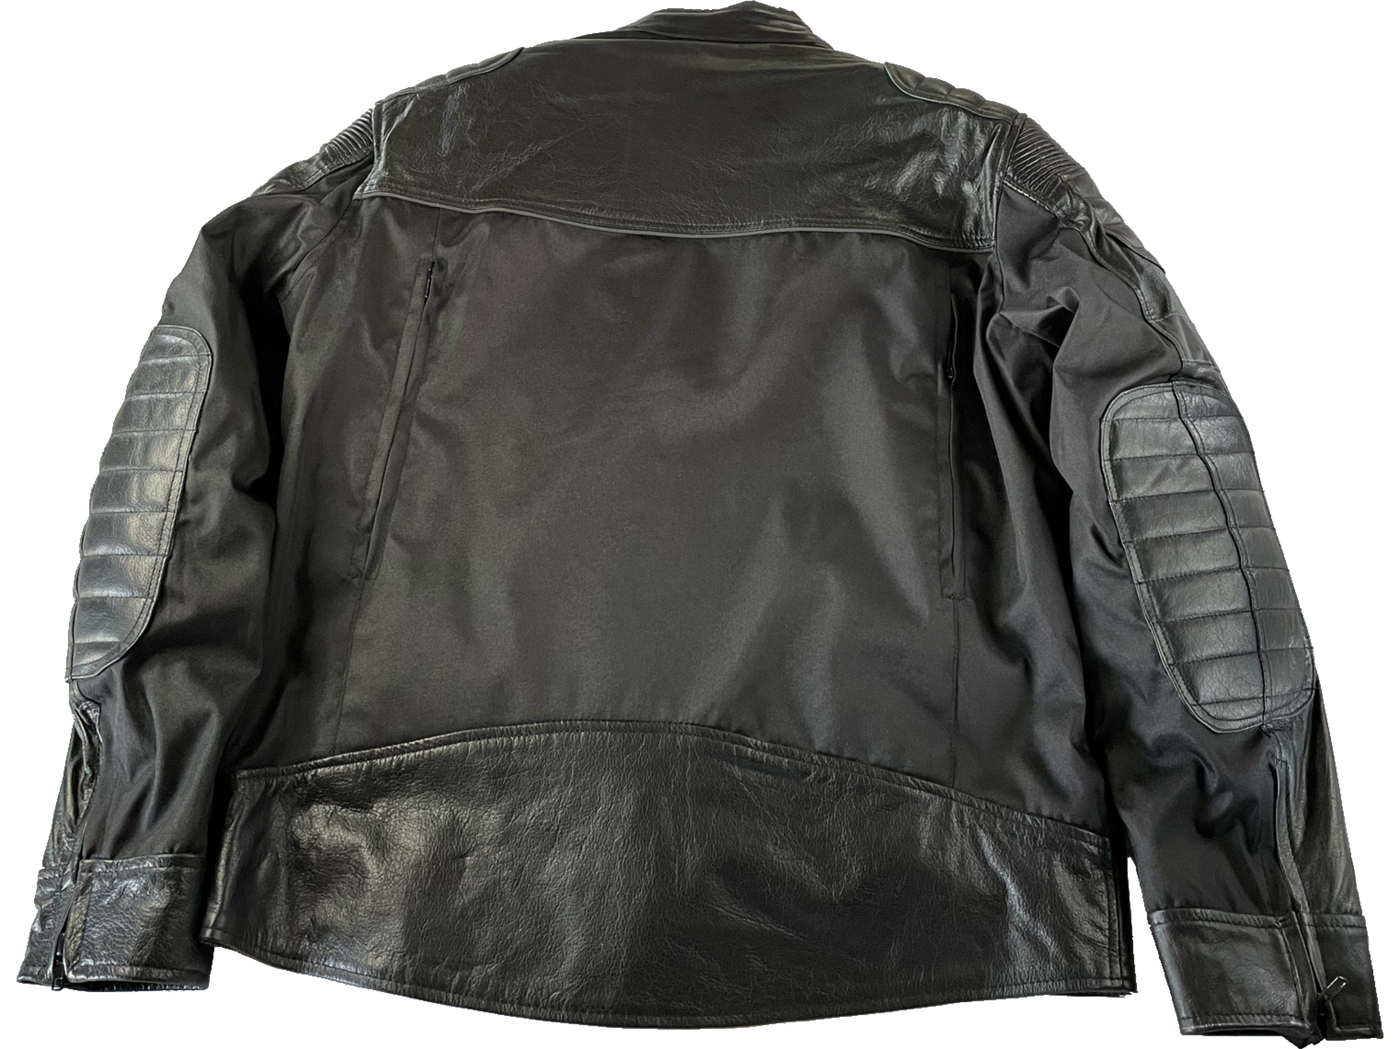 Leather AND Textile Motorcycle Jacket with wide reflective strip across upper arm. Reflective piping running down entire length of sleeve. Horizontal reflective piping across the back. Removable armor. Vents on back. Carry conceal pockets. Removable liner. Available in our shop just outside Nashville in Smyrna, TN.